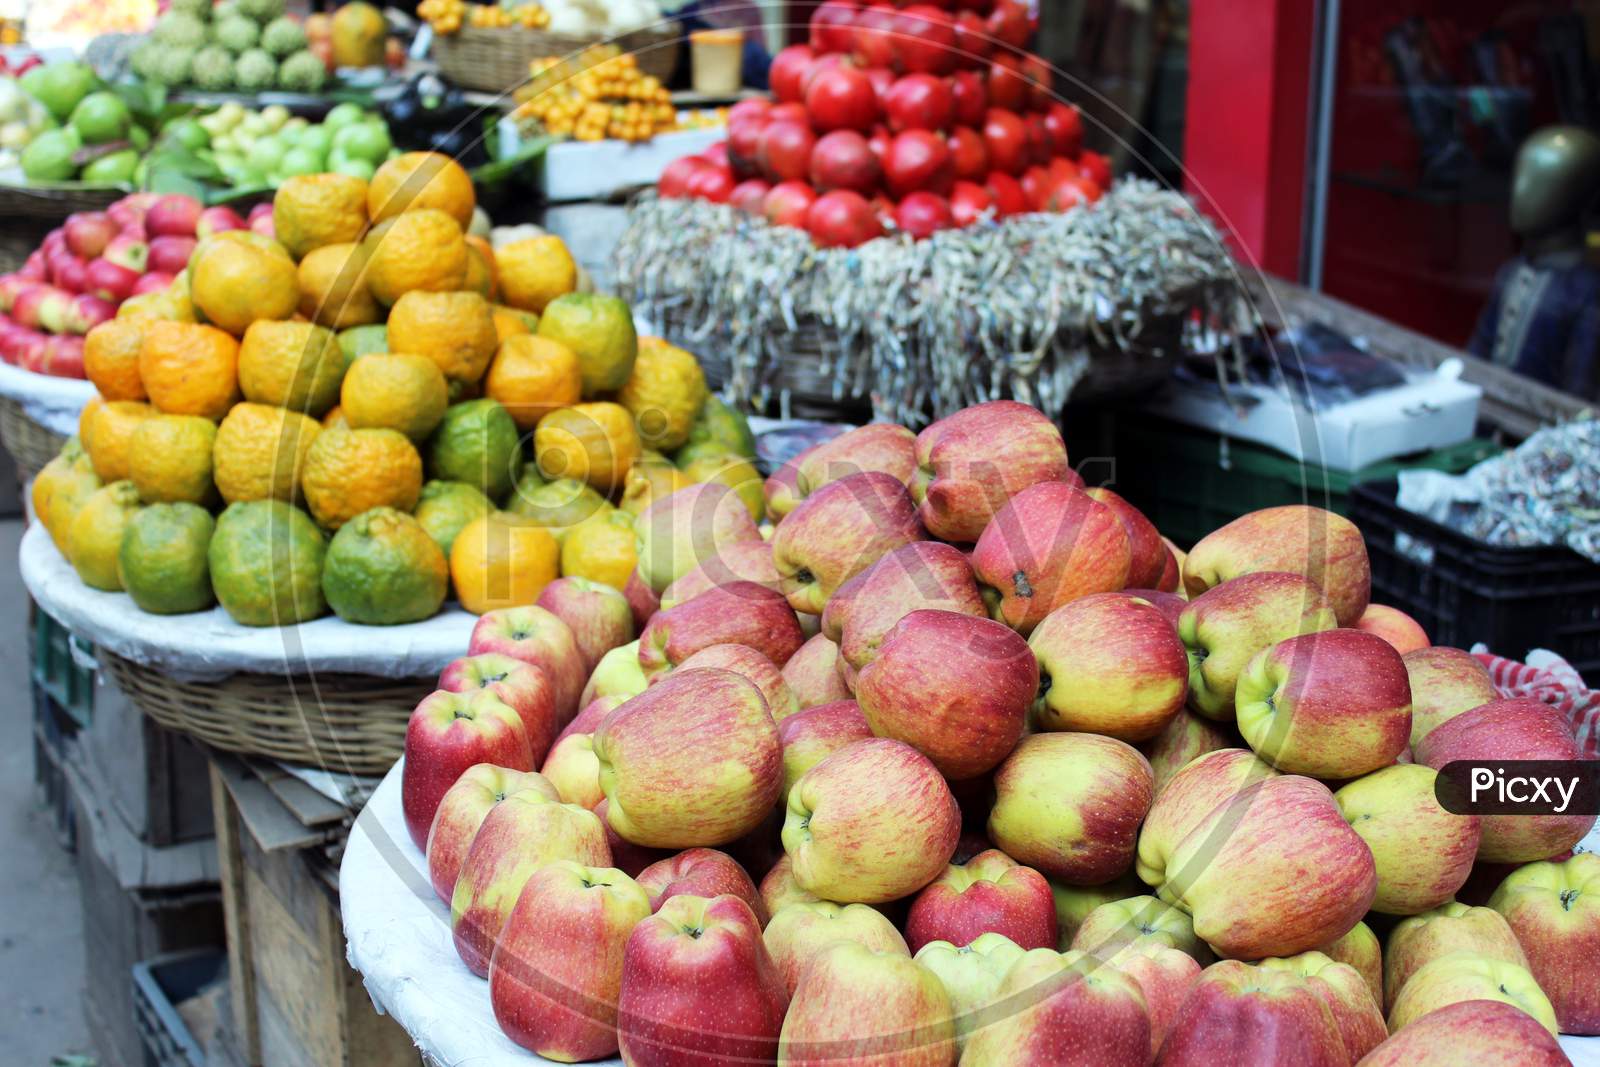 Fruits selling on a open shop at a busy market.